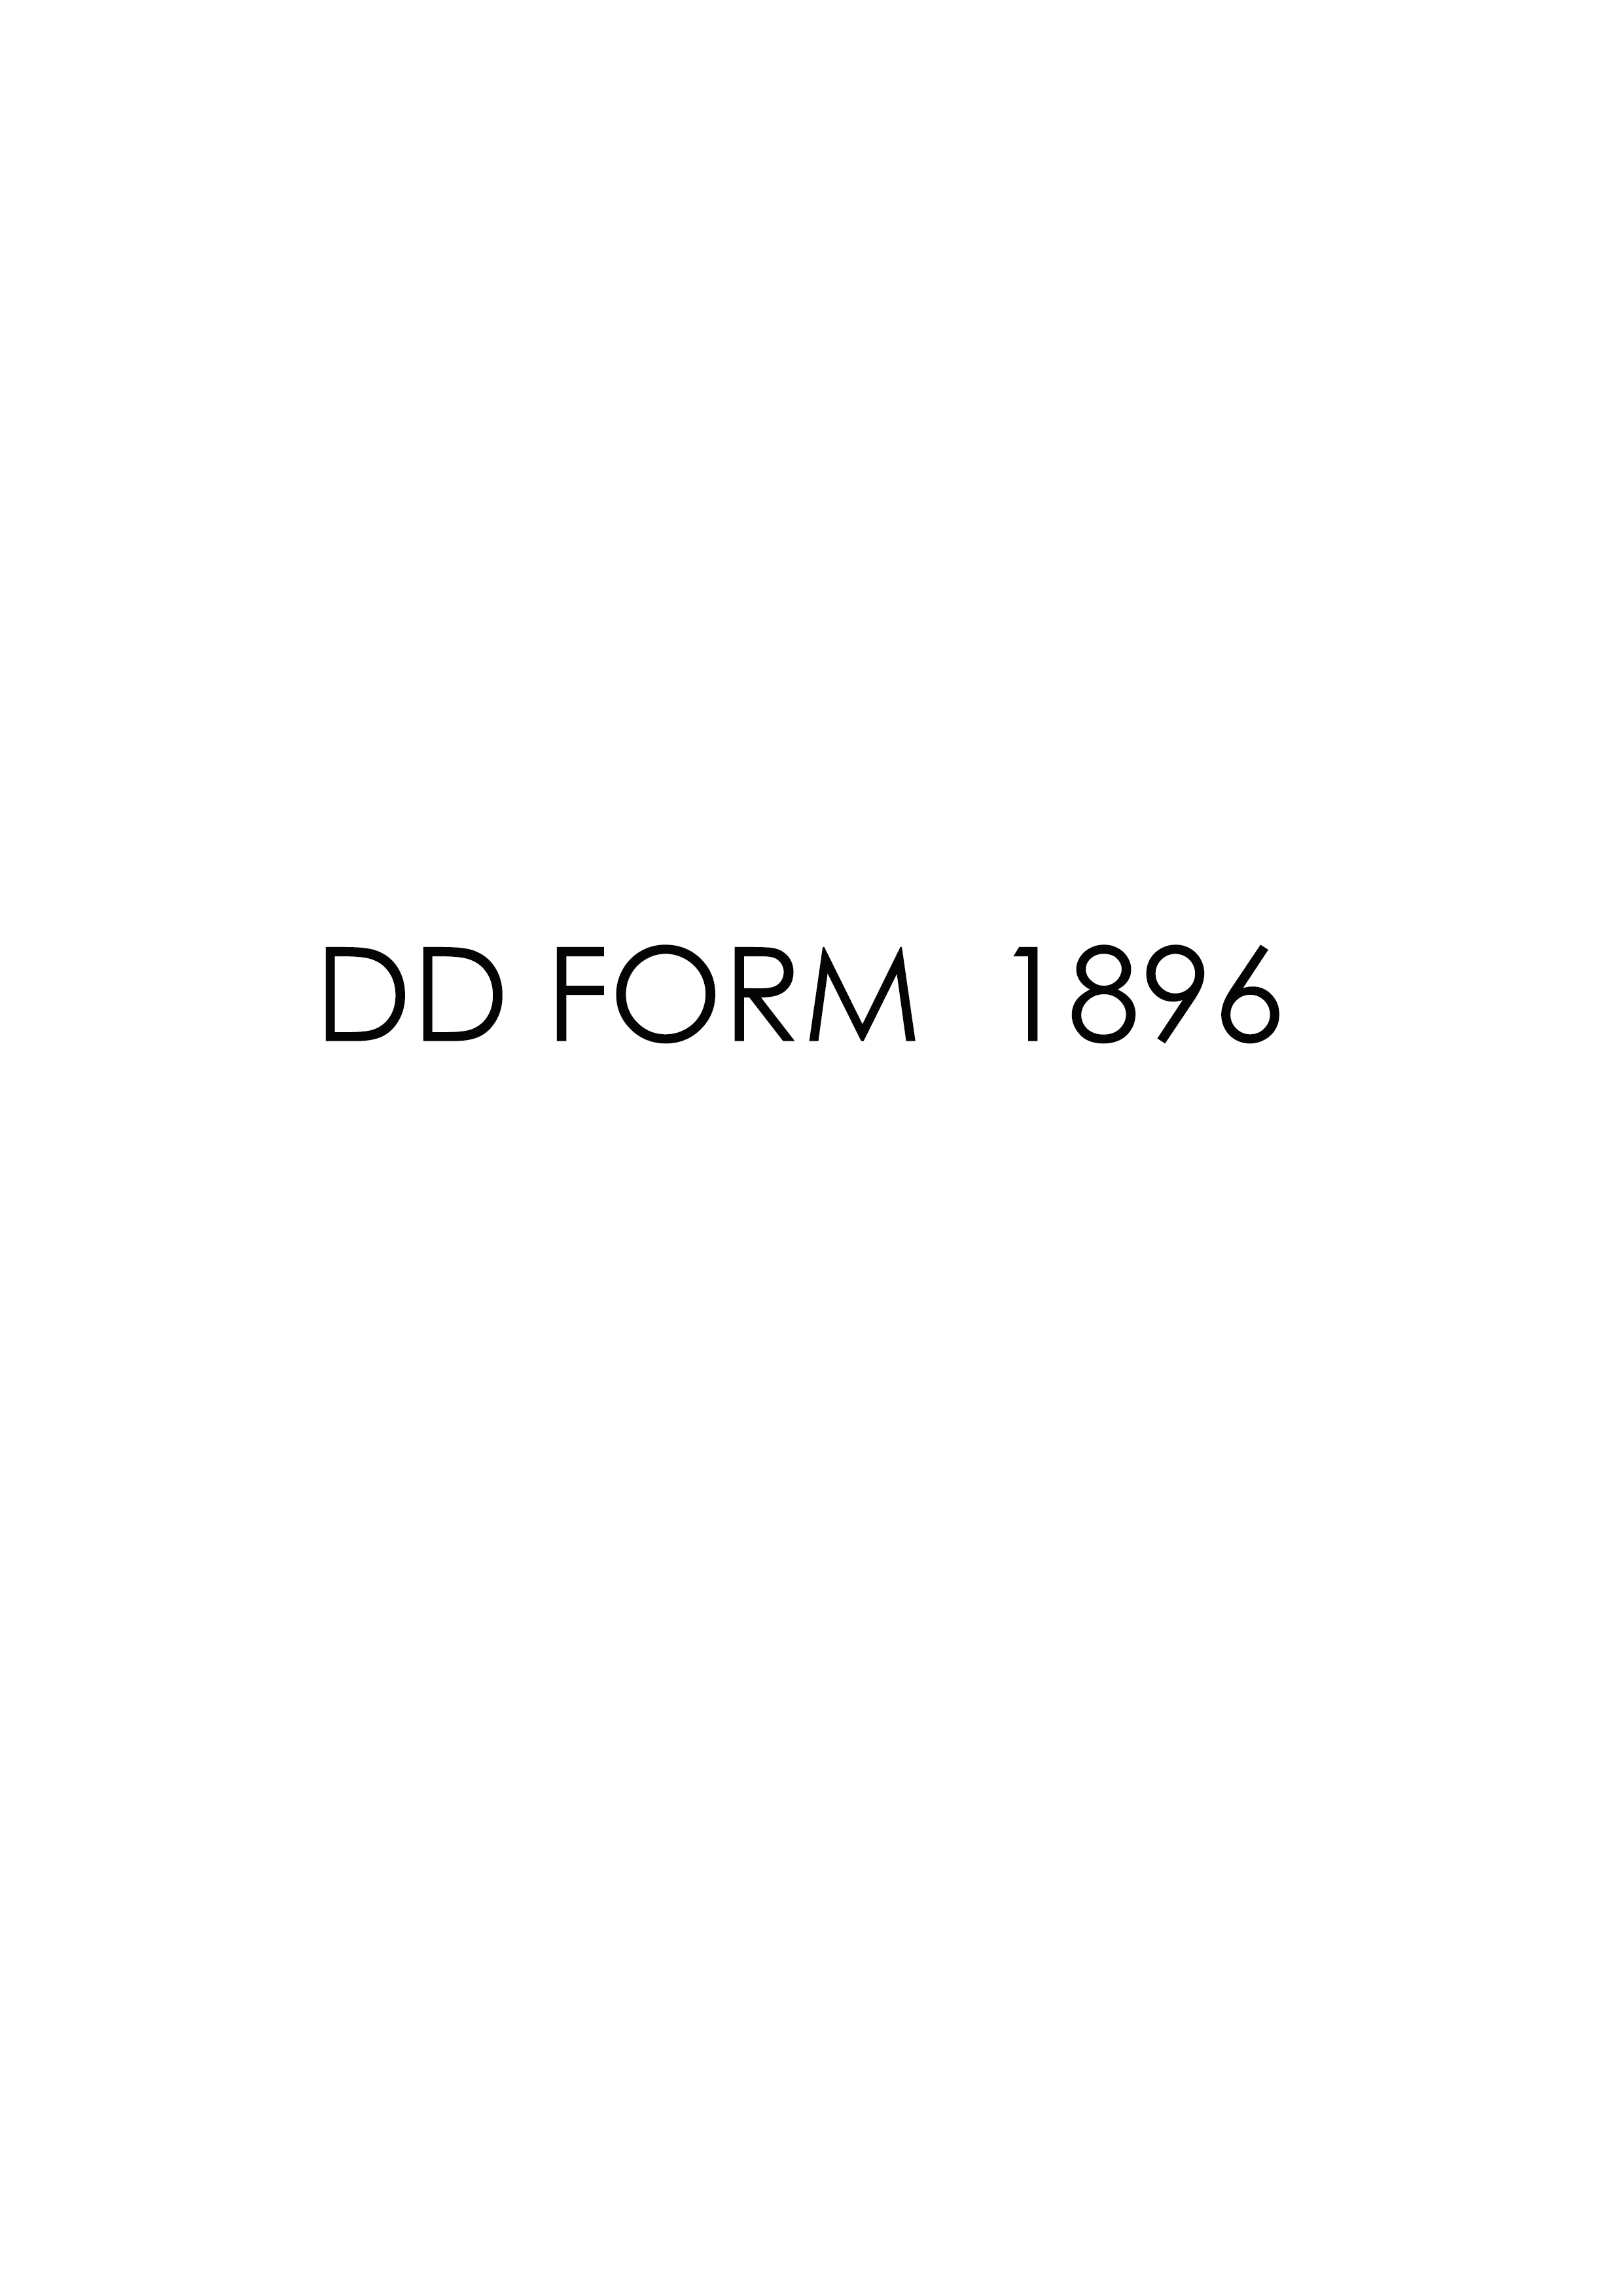 Download Fillable dd Form 1896